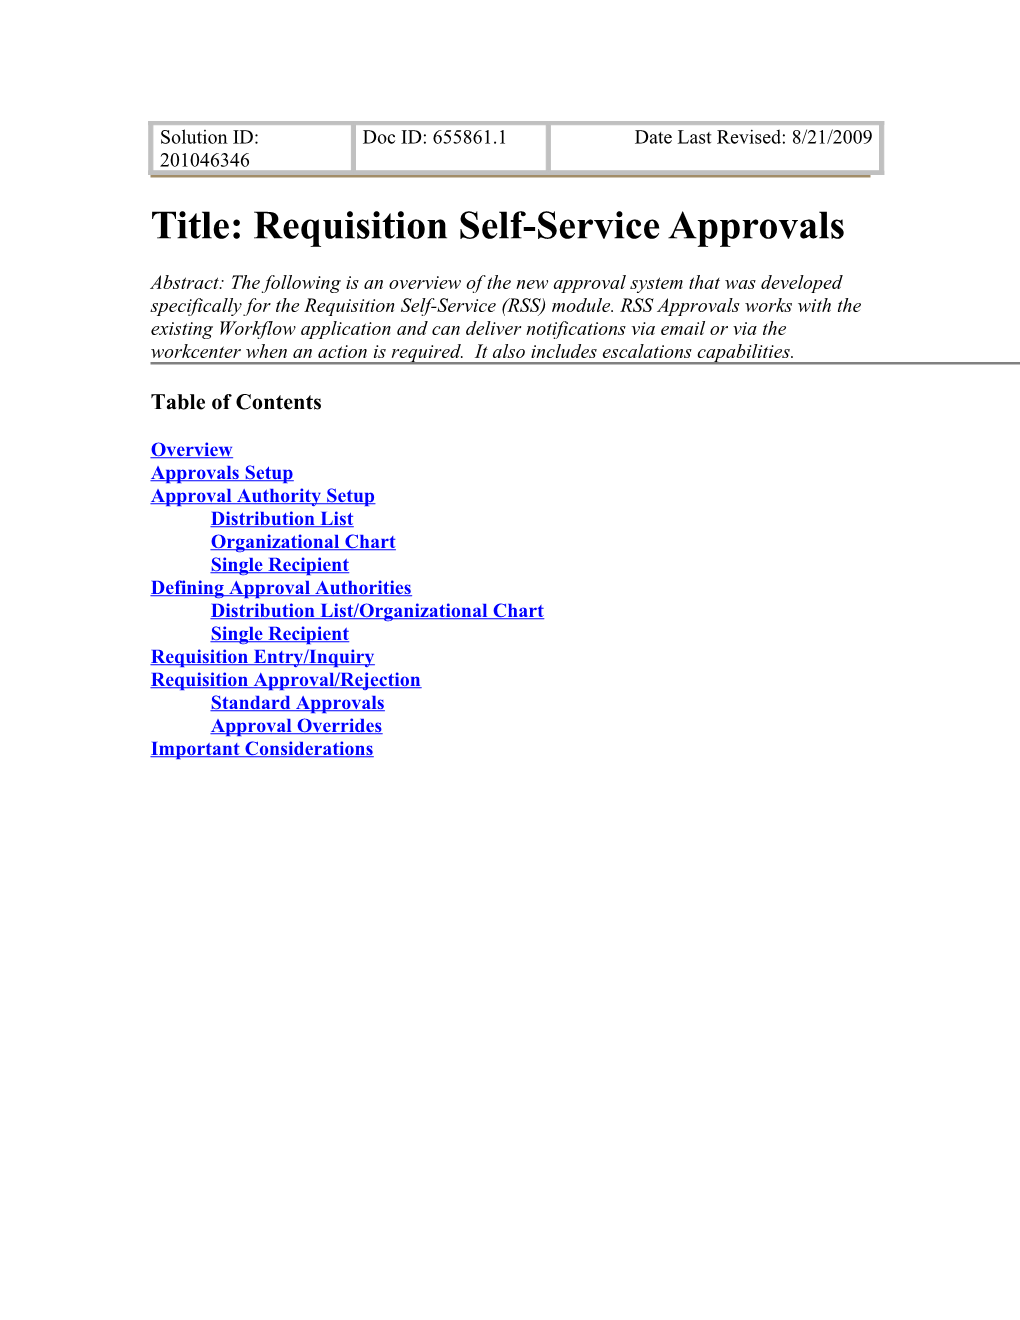 Title: Requisition Self-Serviceapprovals